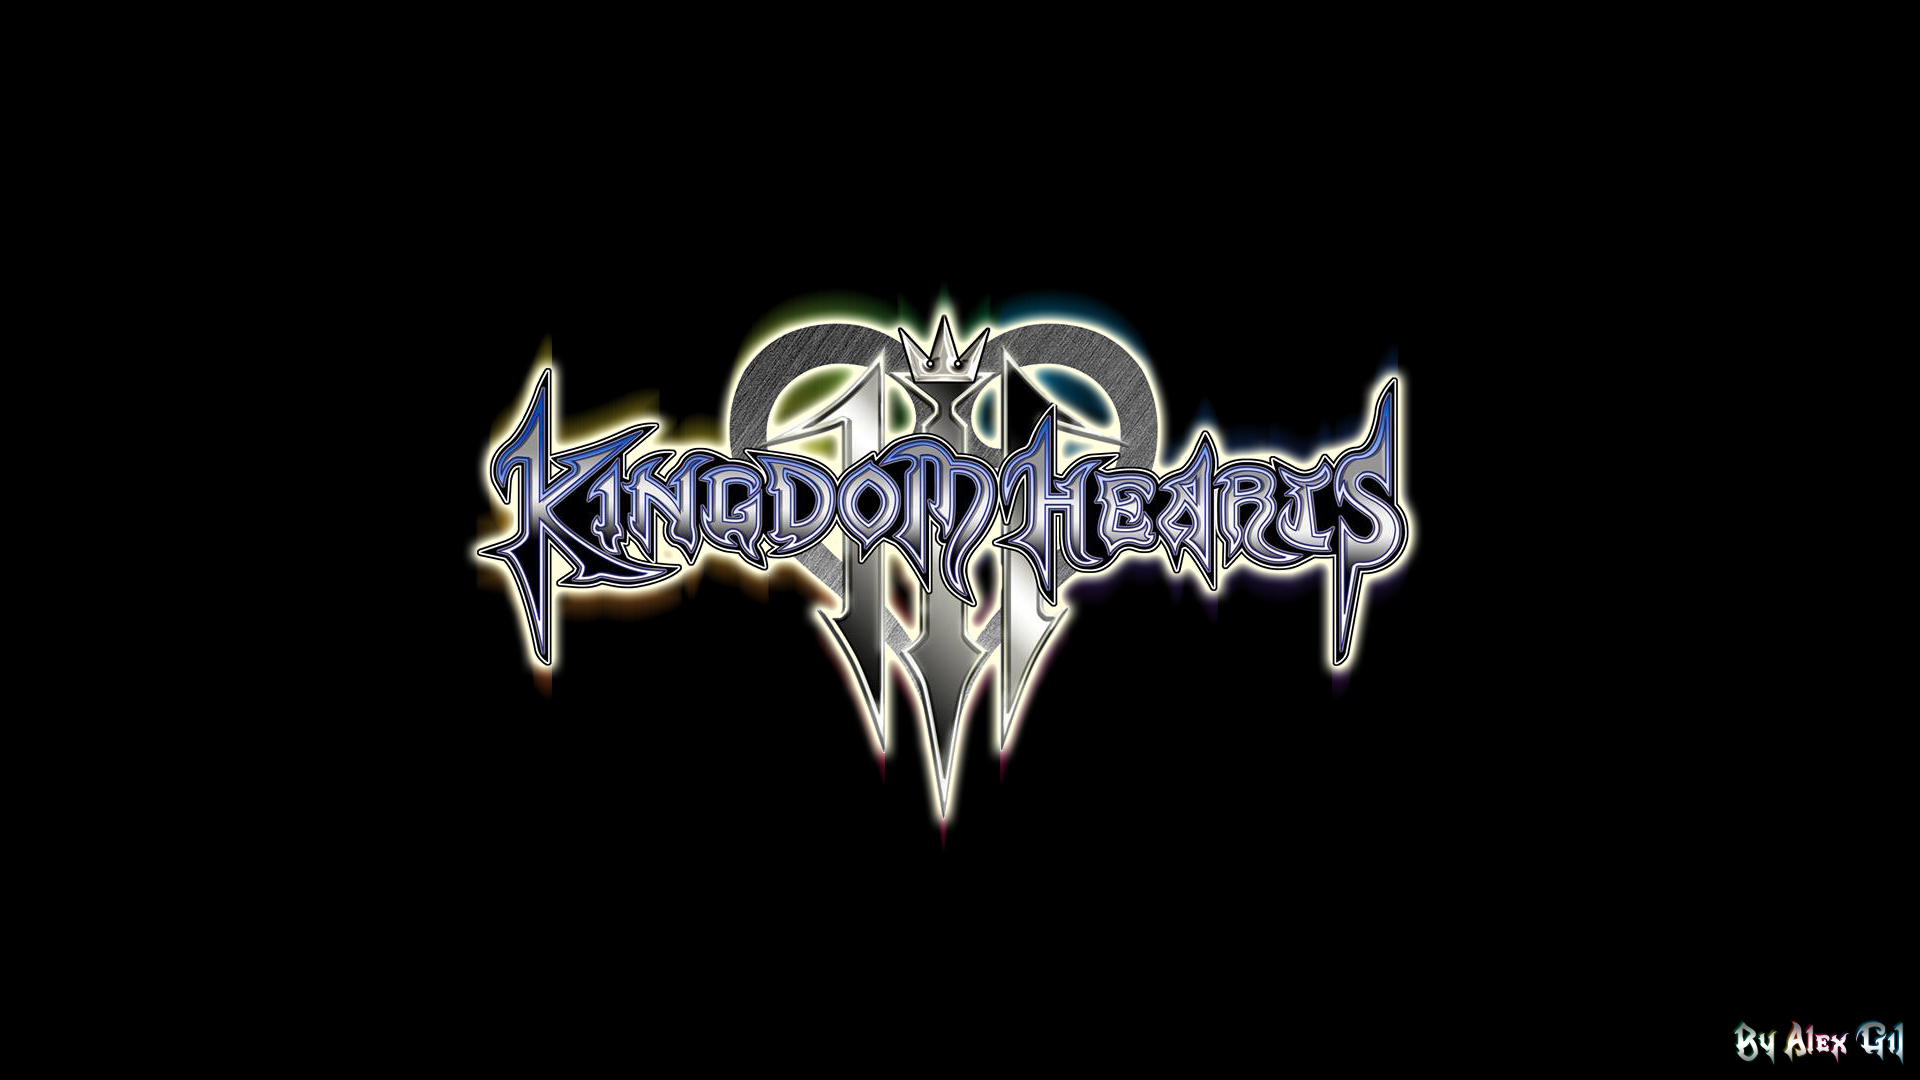 Free Download Image Gallery Kingdom Hearts 3 Wallpaper 19x1080 19x1080 For Your Desktop Mobile Tablet Explore 99 Kingdom Hearts Iii Wallpapers Kingdom Hearts Iii Wallpapers Kingdom Hearts Background Kingdom Hearts Wallpapers